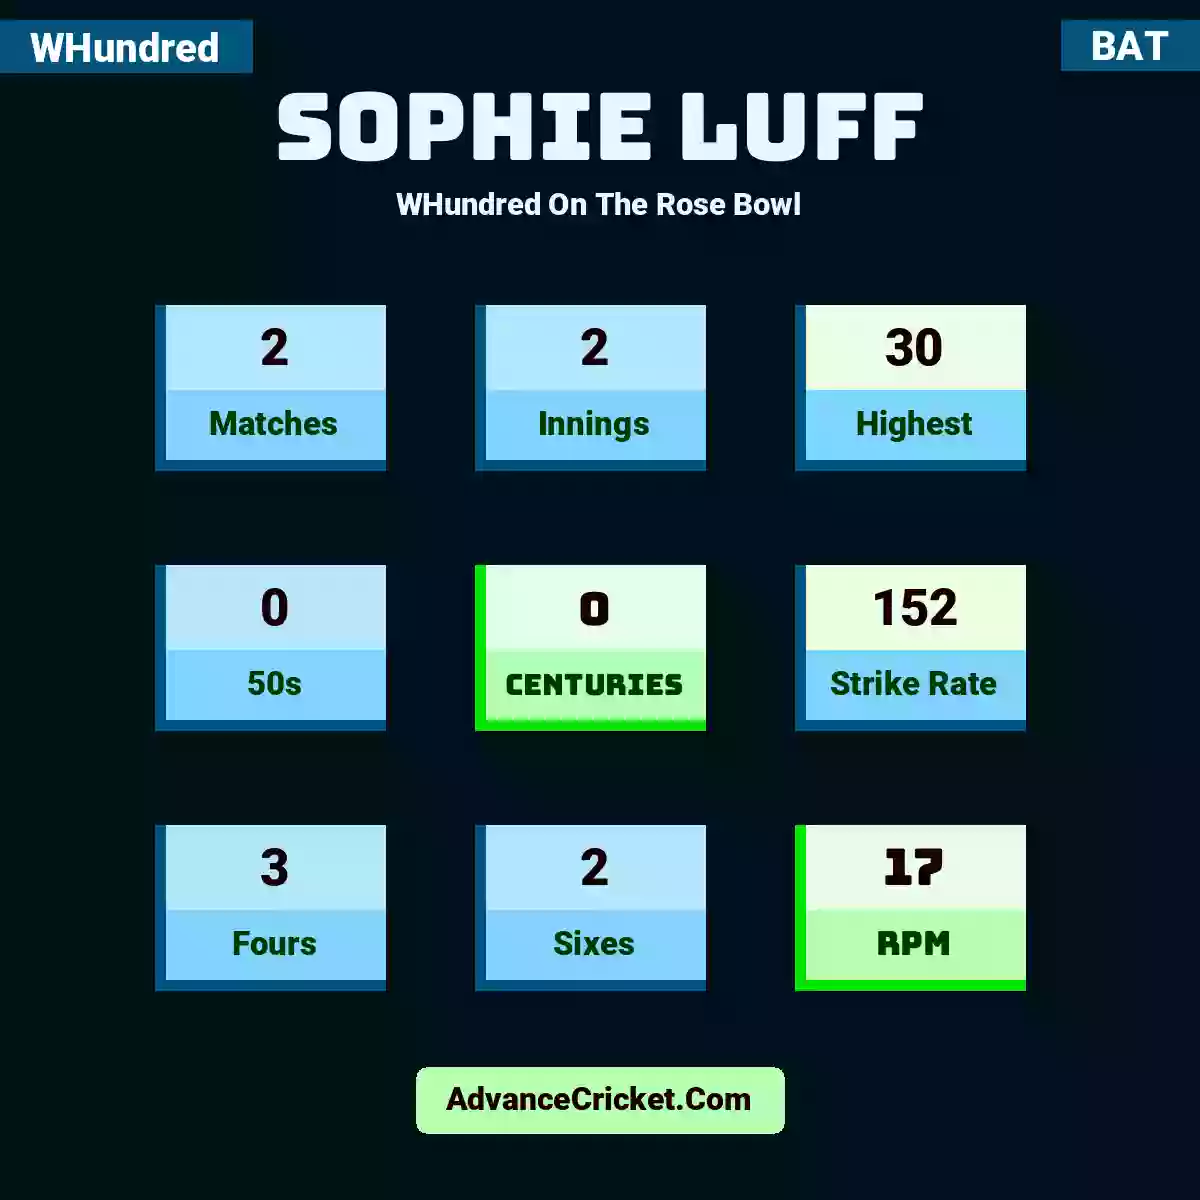 Sophie Luff WHundred  On The Rose Bowl, Sophie Luff played 2 matches, scored 30 runs as highest, 0 half-centuries, and 0 centuries, with a strike rate of 152. S.Luff hit 3 fours and 2 sixes, with an RPM of 17.